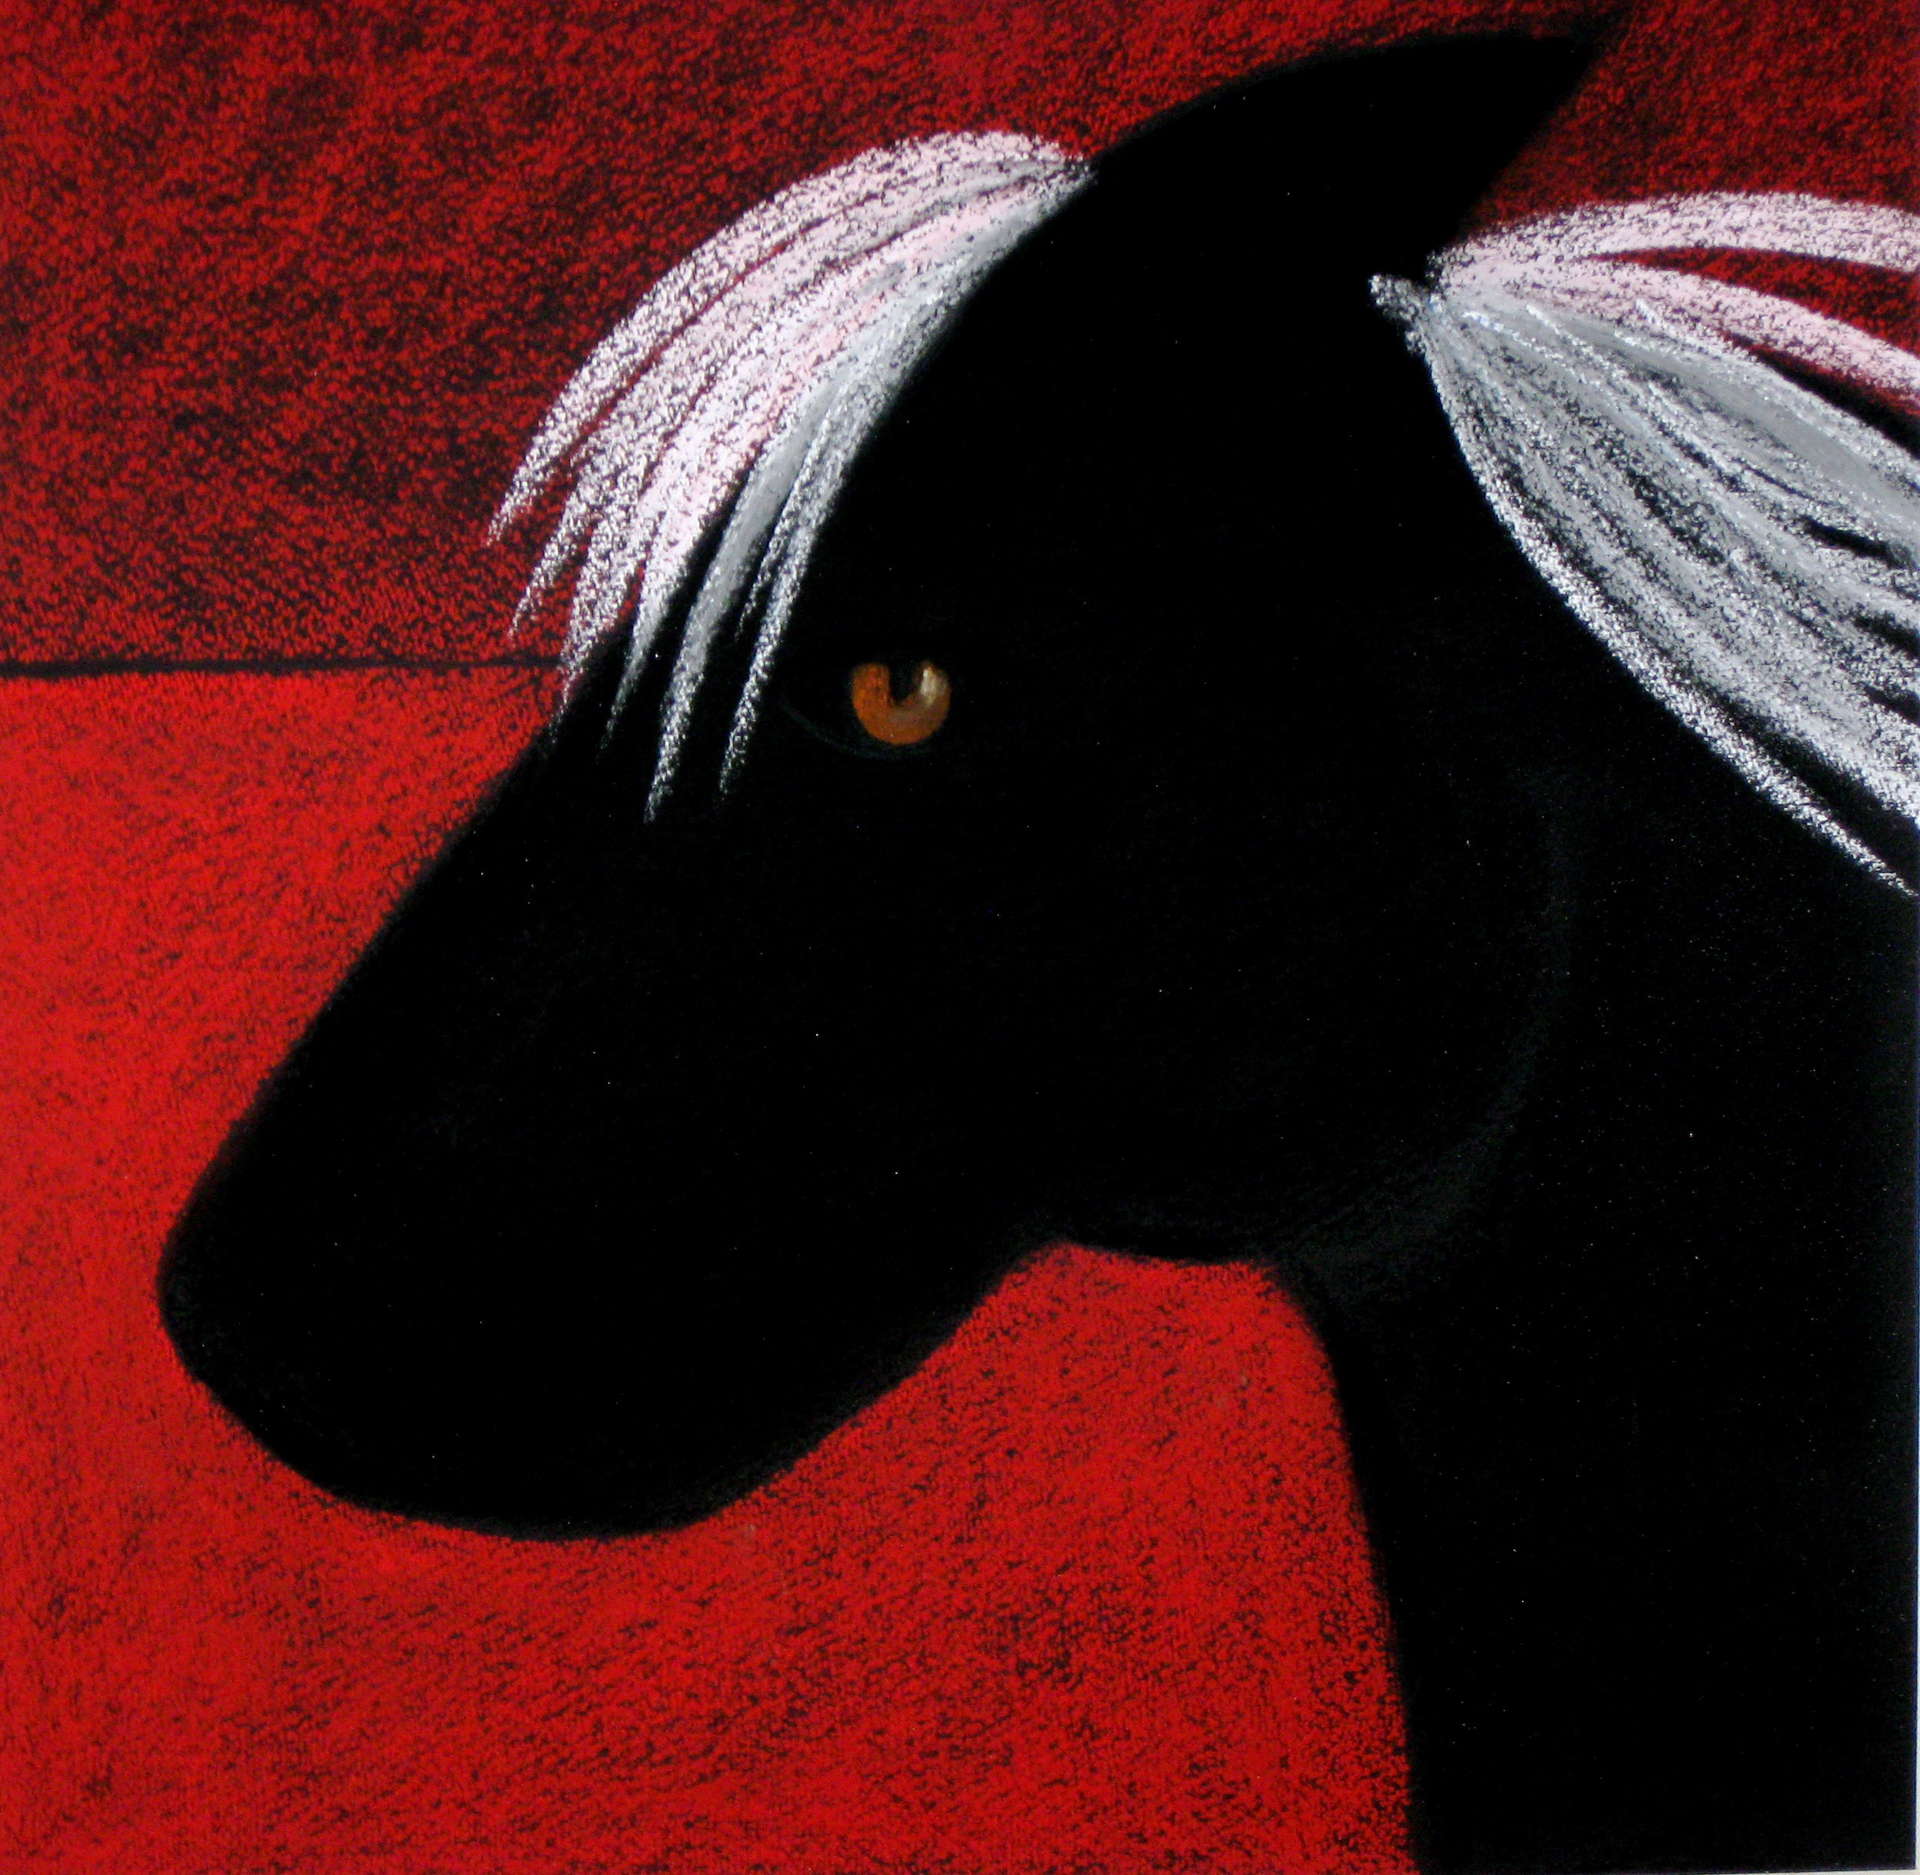 Black Horse at Dusk -SOLD available for commission by Carole LaRoche